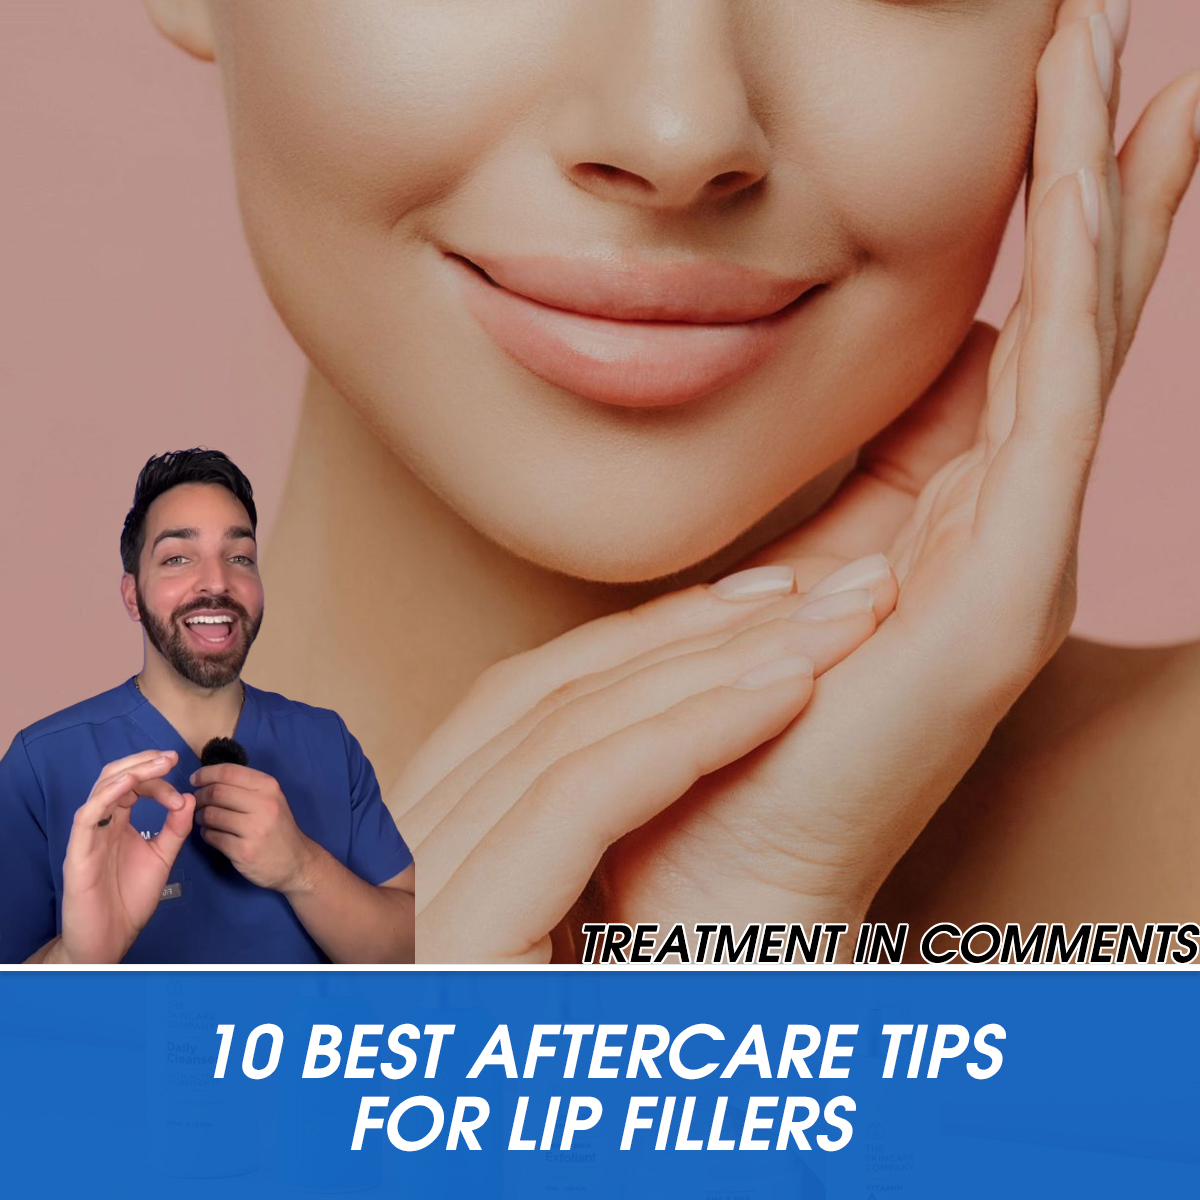 10 Best Aftercare Tips for Lip Fillers